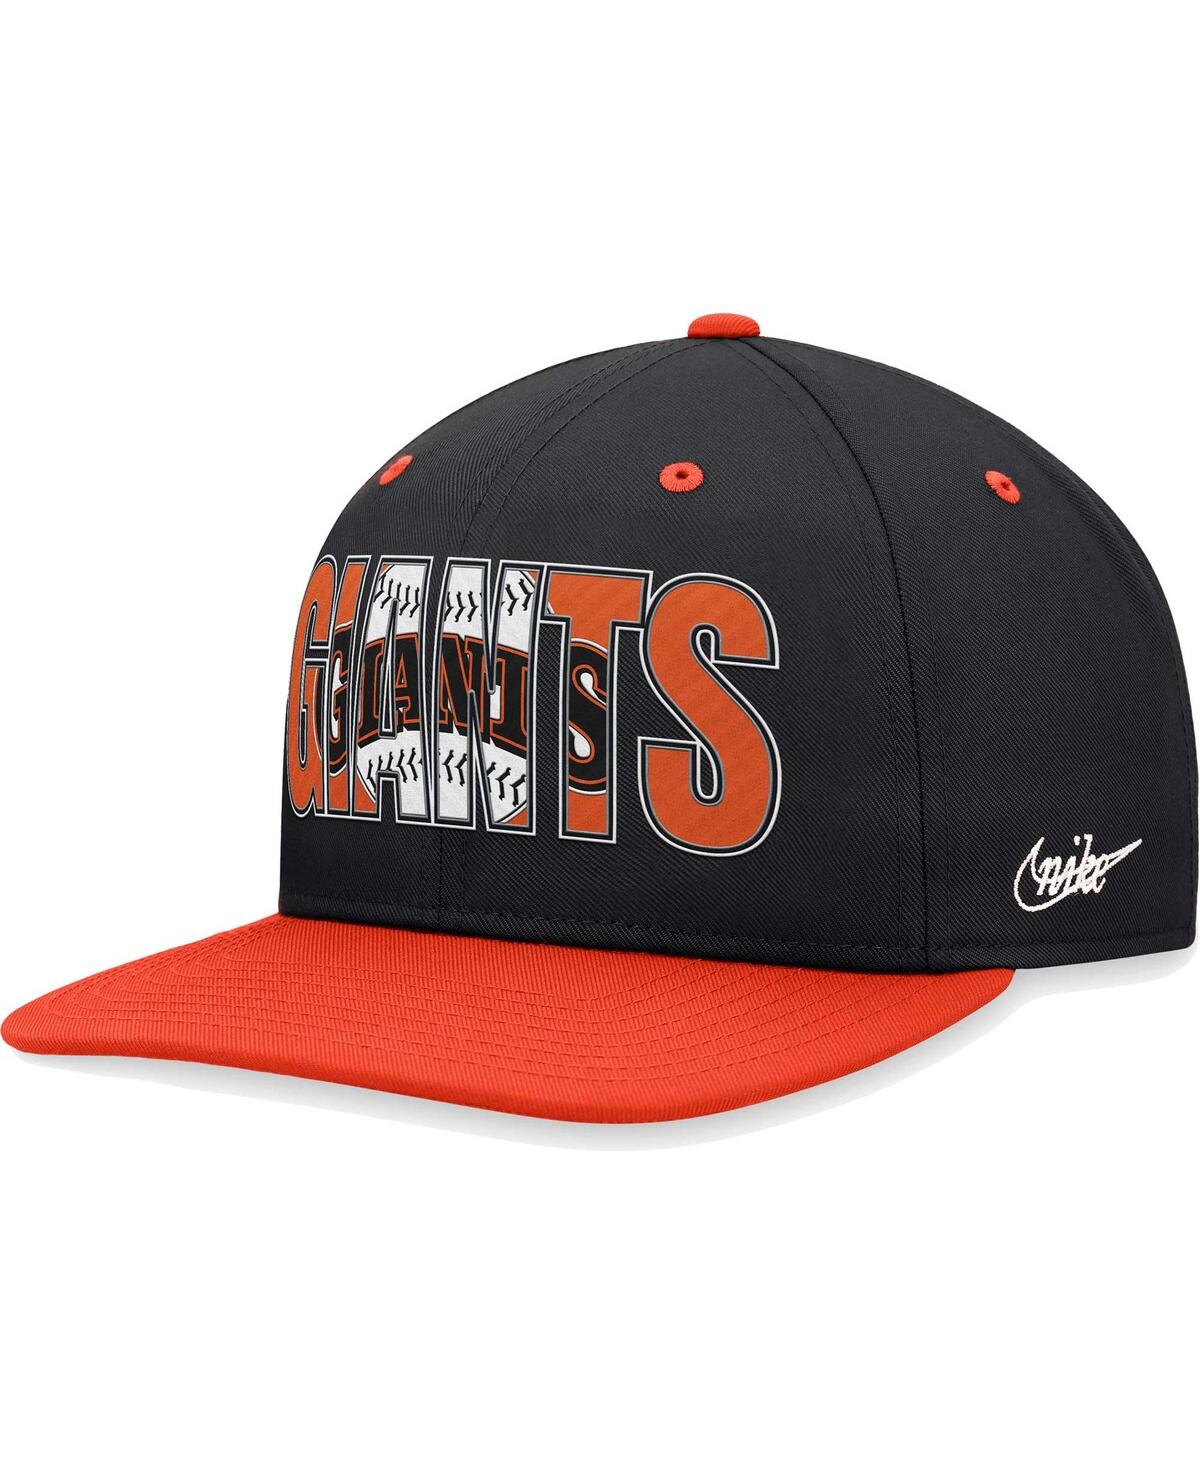 Nike Men's  Black San Francisco Giants Cooperstown Collection Pro Snapback Hat